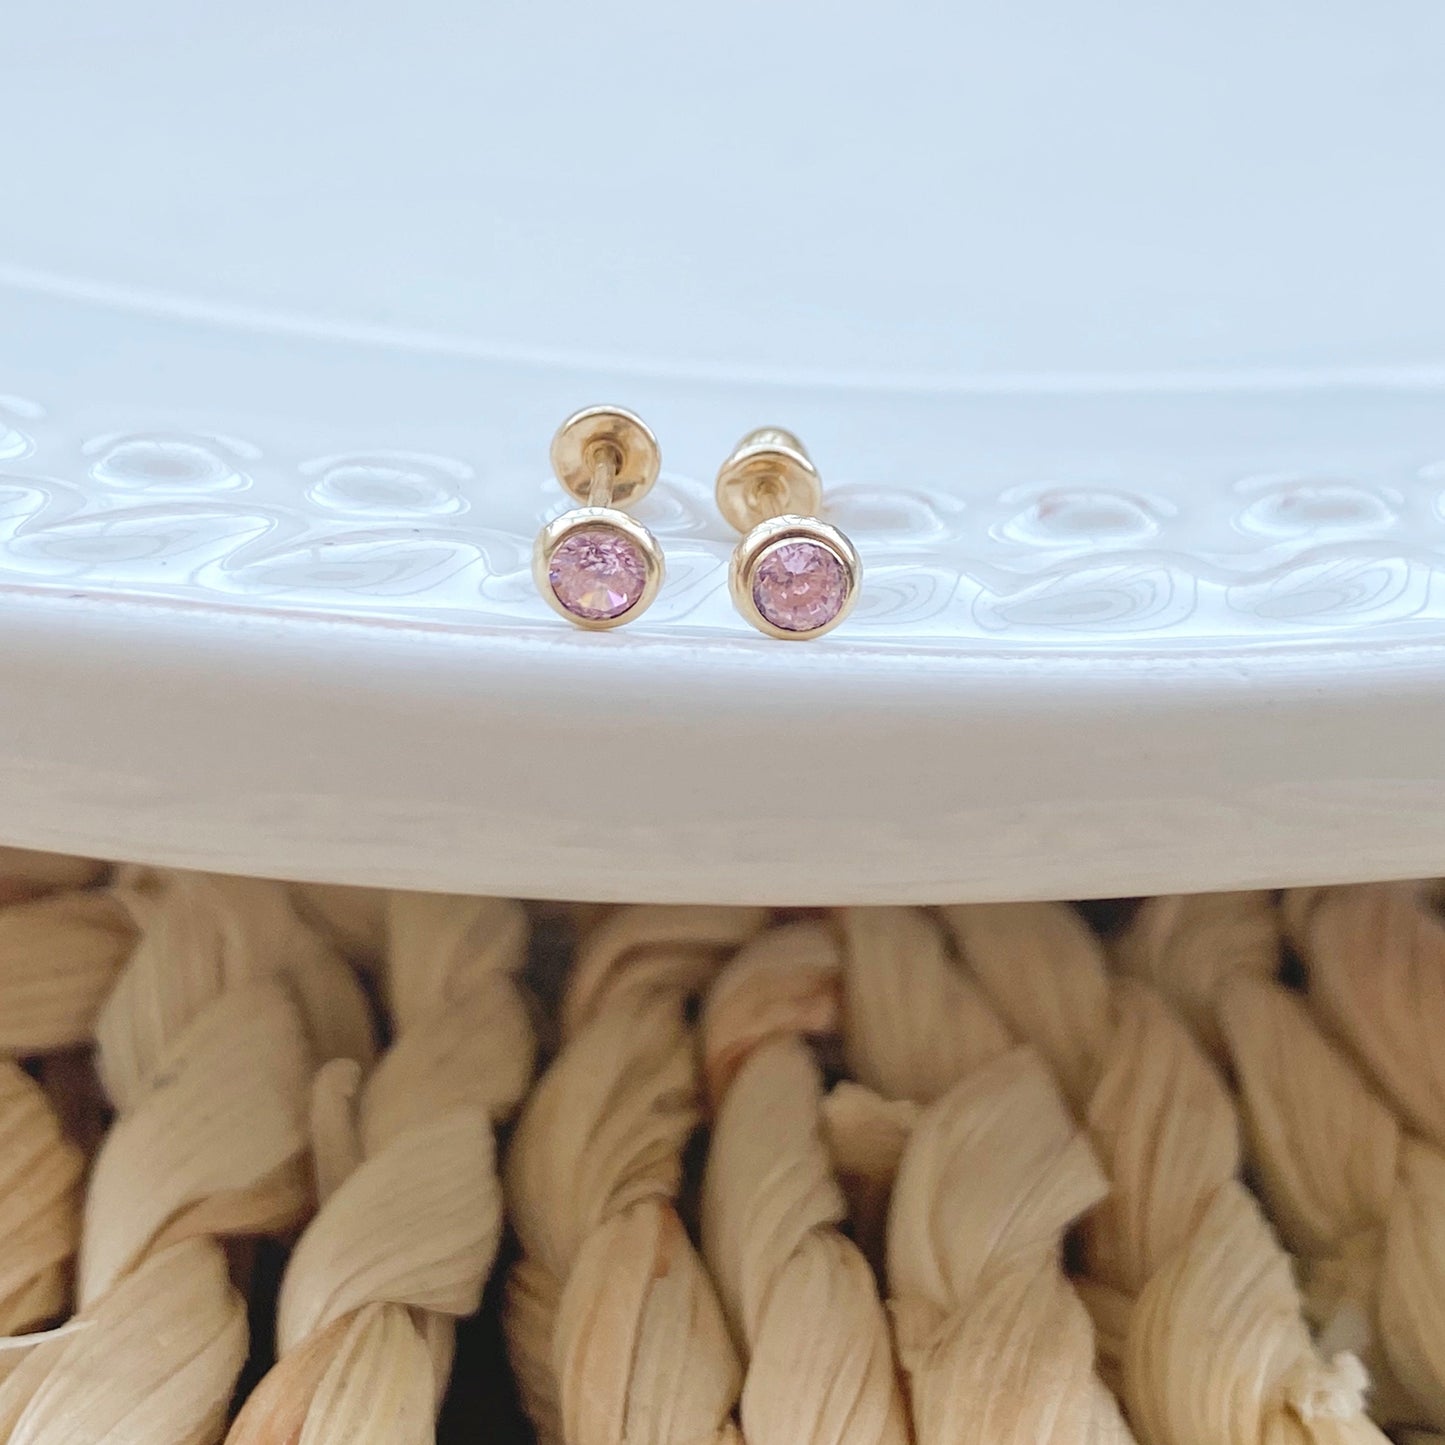 These solid gold stud earrings are set with a 3mm bezel and are perfect for everyday wear. They have a screw back for extra security, so they won't fall out or get lost. These tiny bezel set cubic zirconia diamond earrings make the perfect gift for everyone on your lis